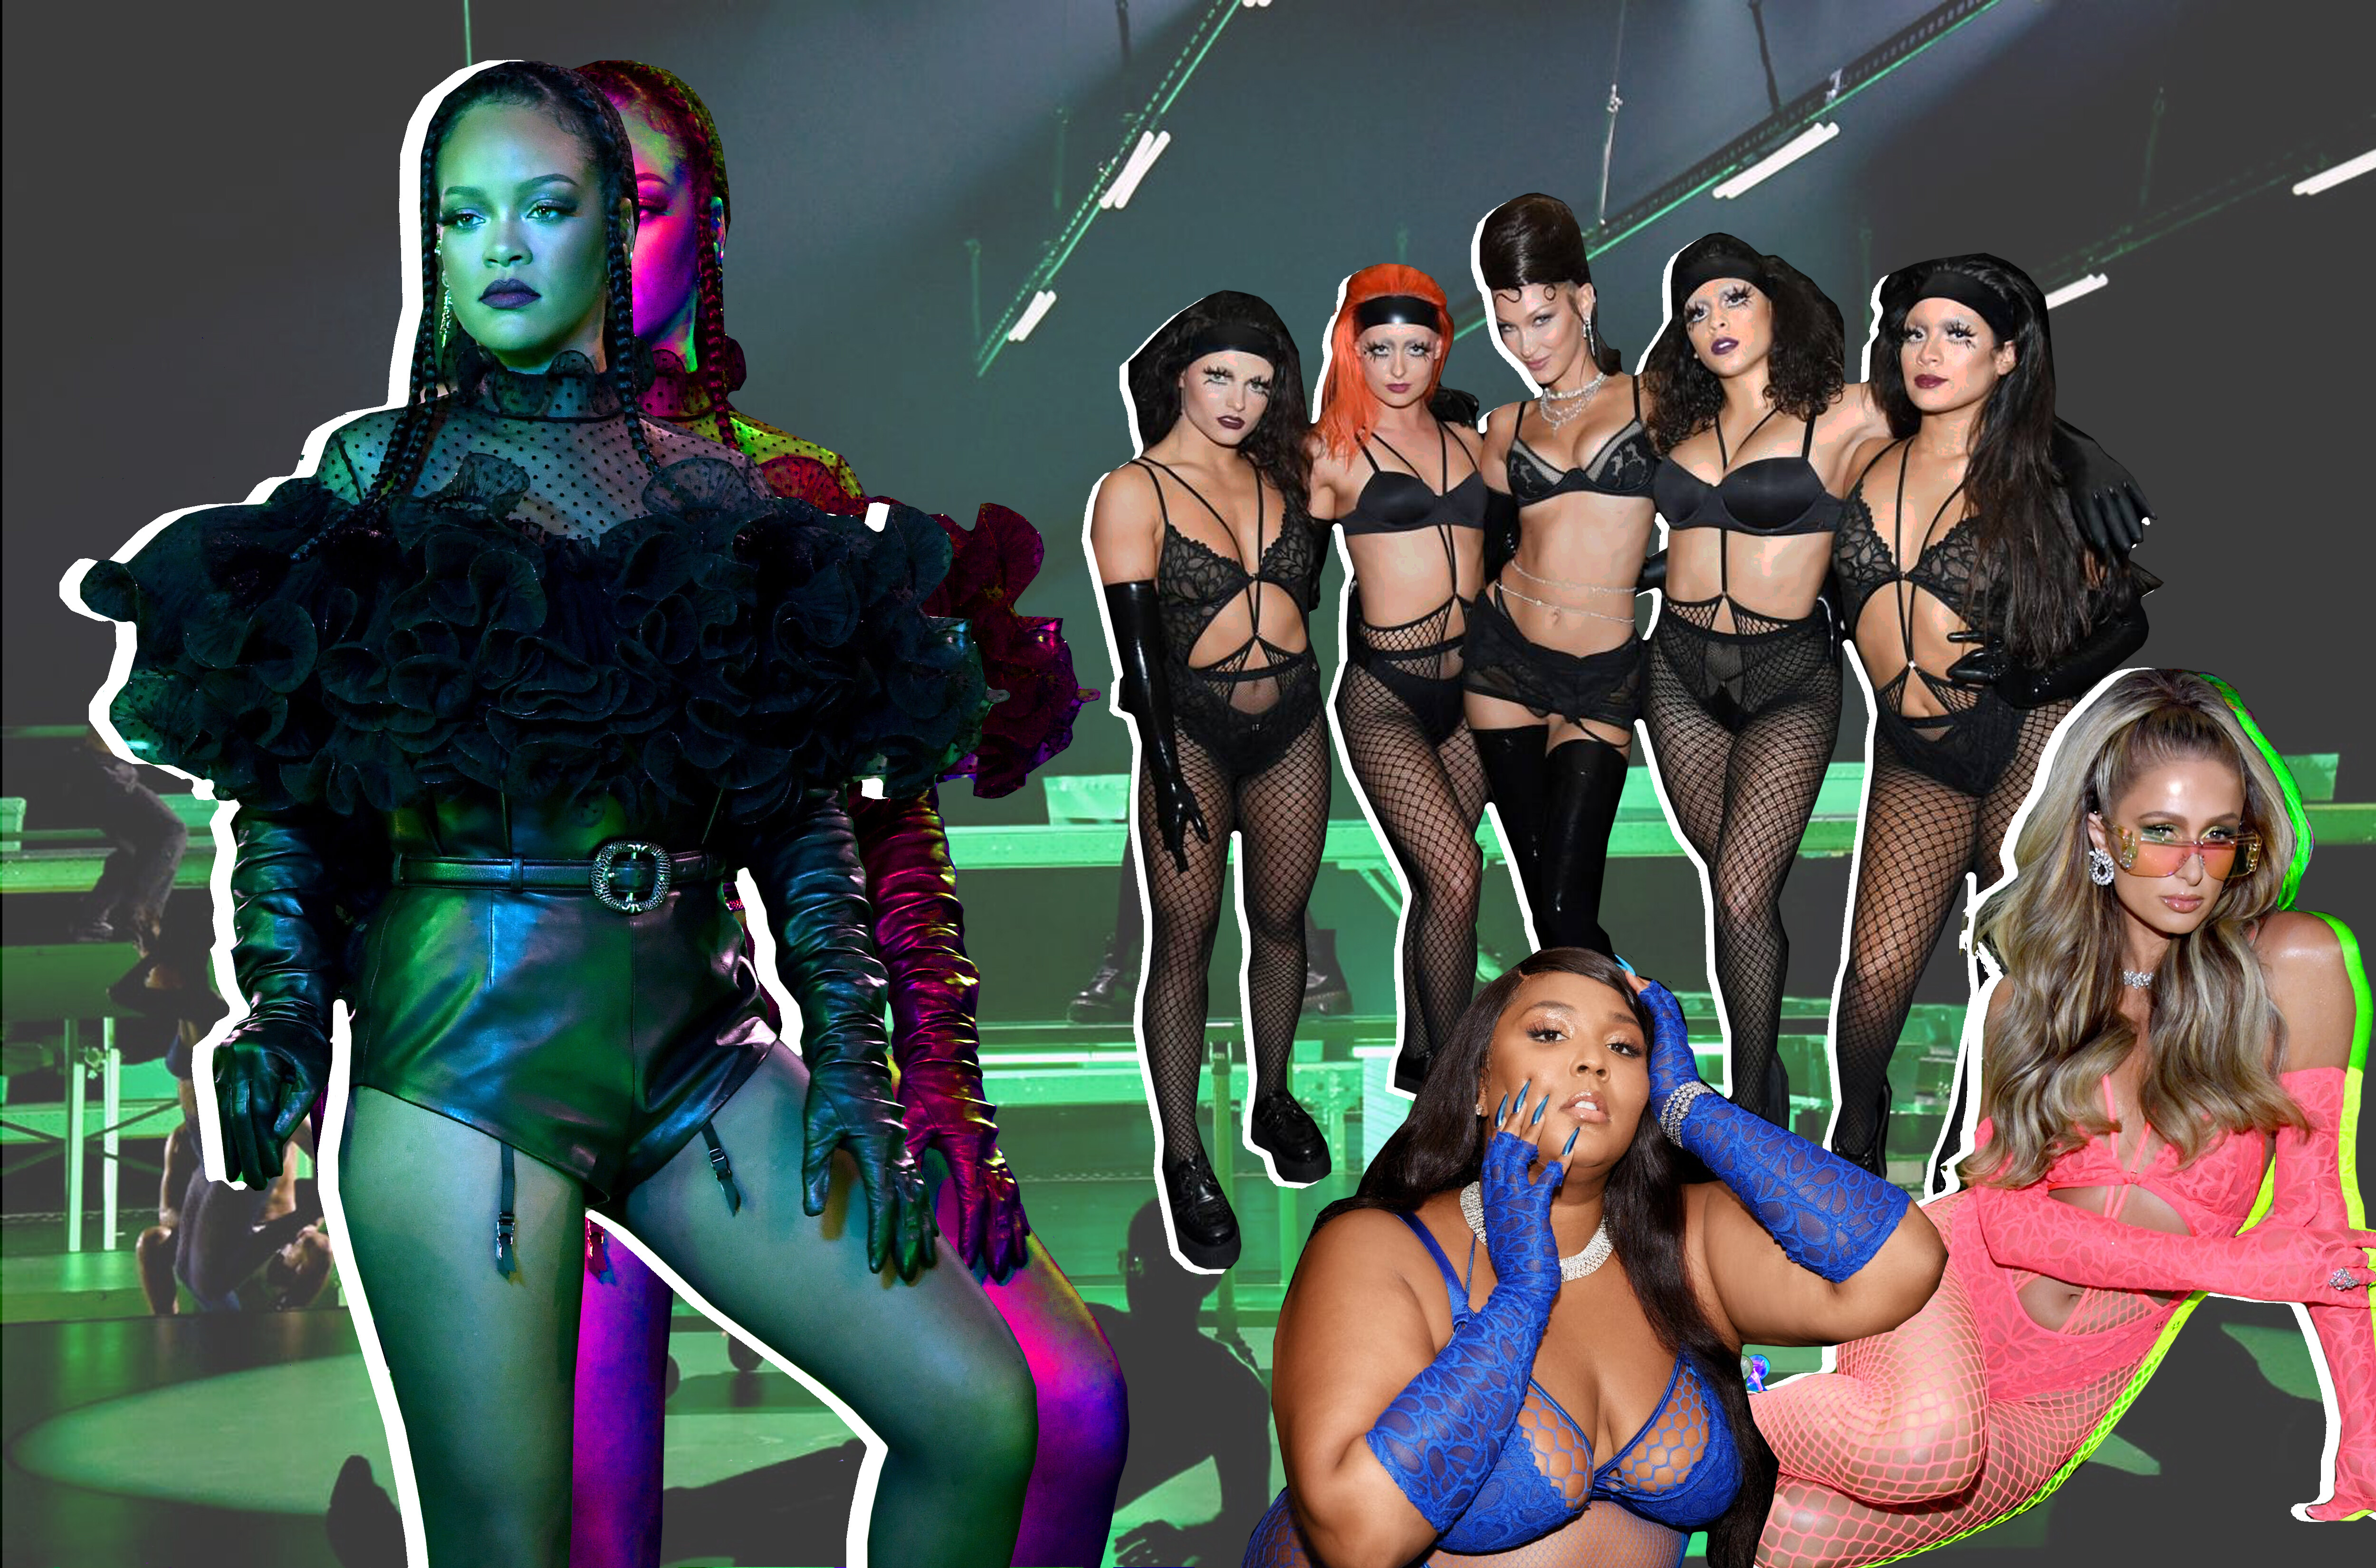 Stop What You're Doing: Rihanna's Savage x Fenty Performance has